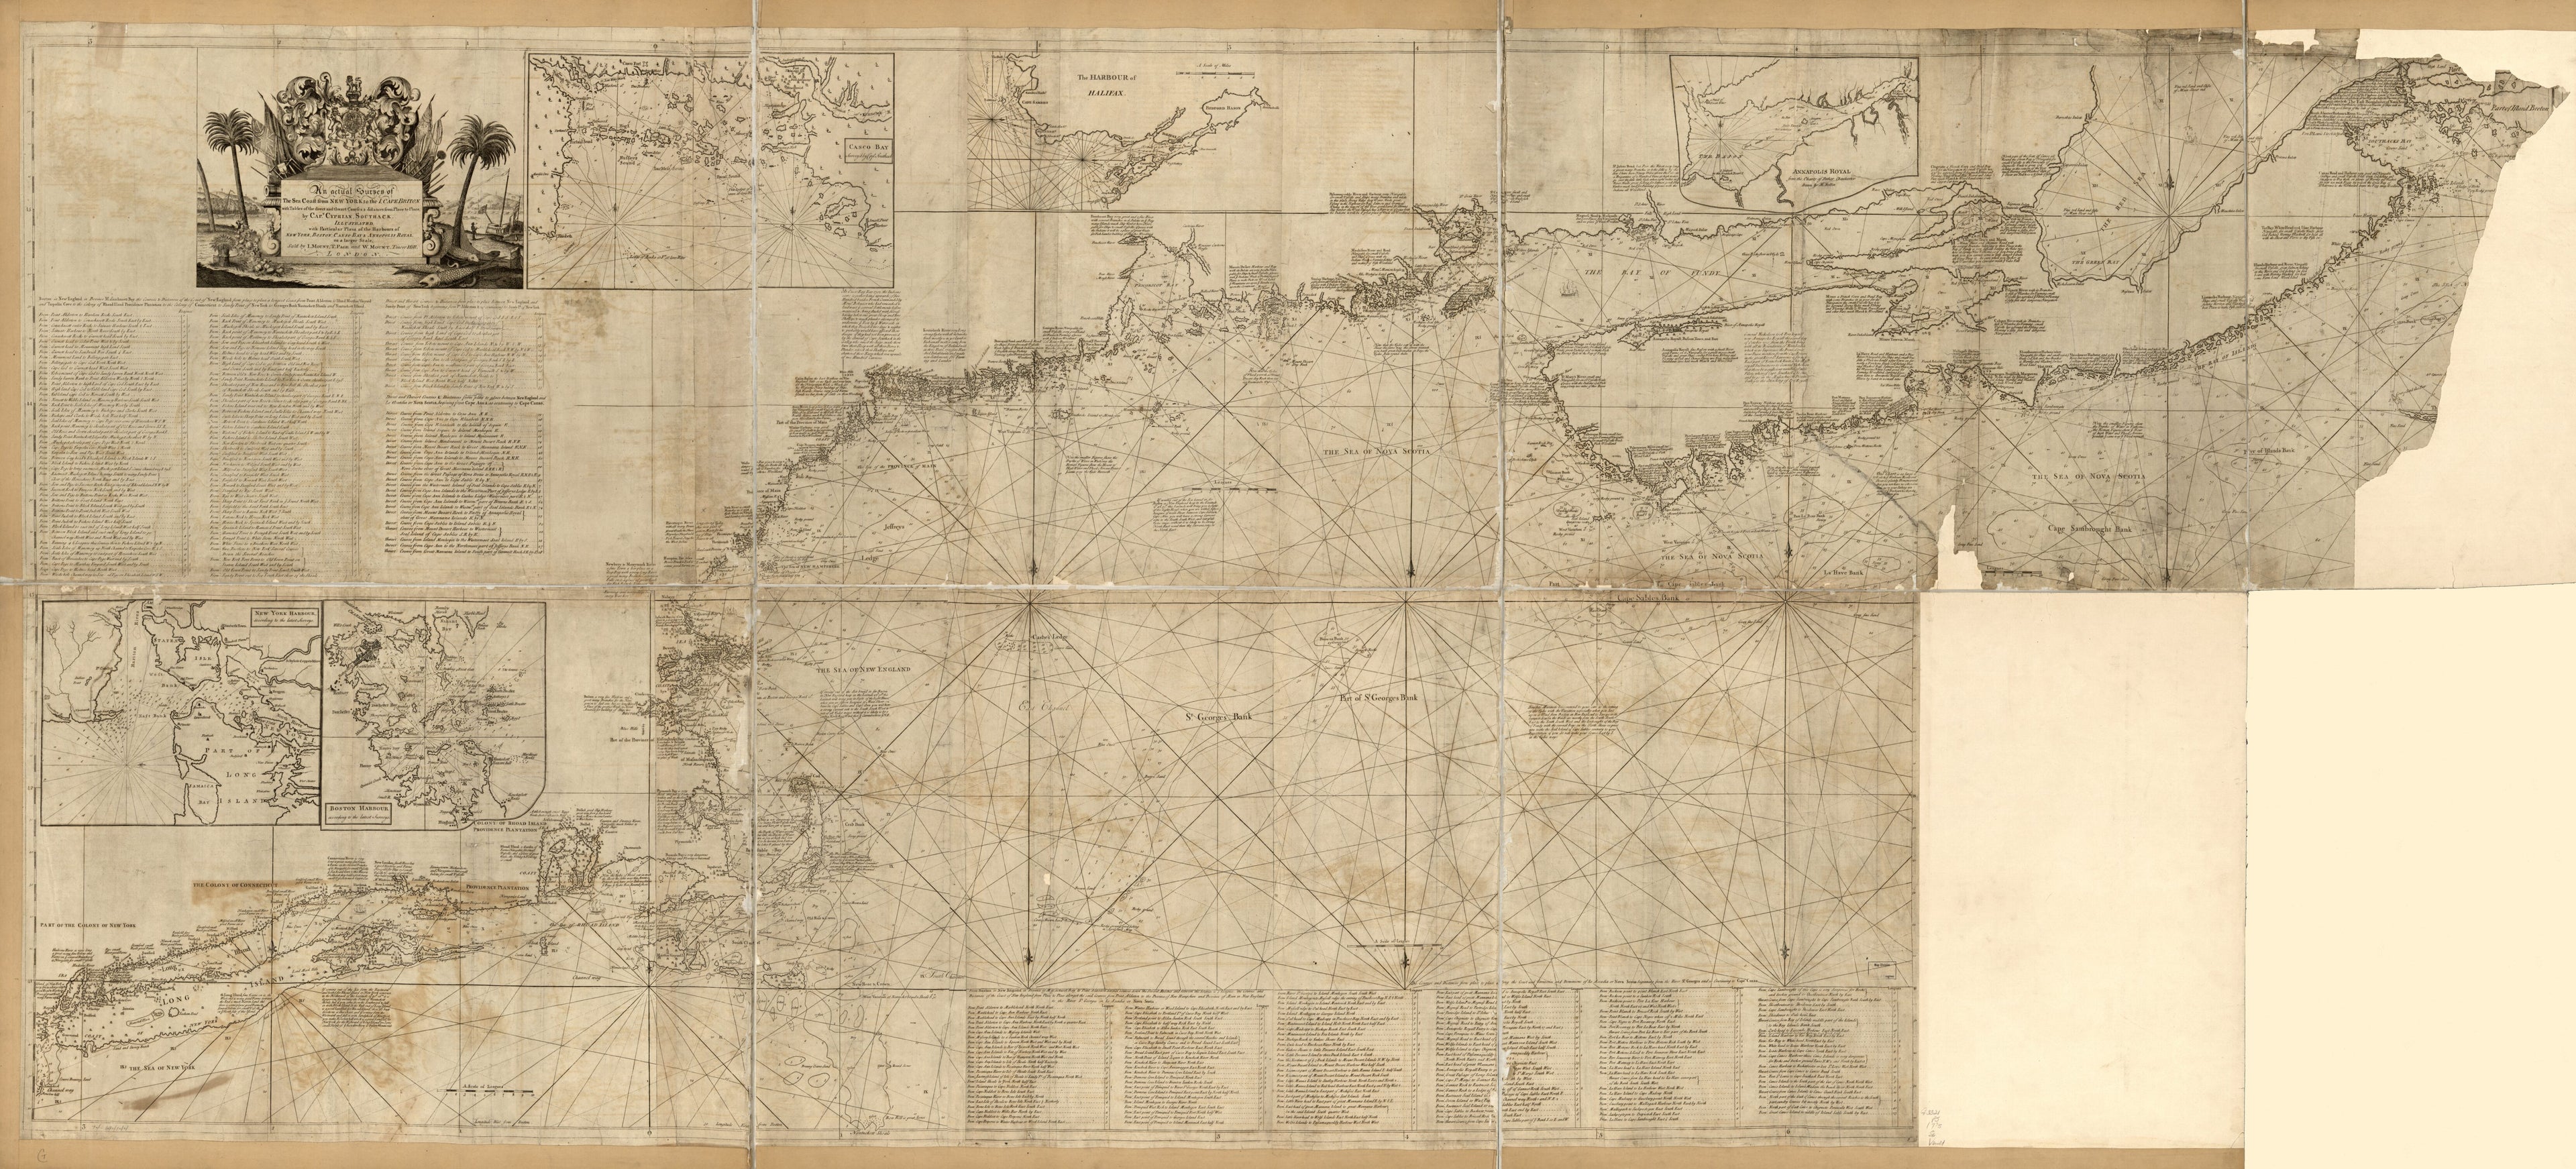 This old map of An Actual Survey of the Sea Coast from New York to the I. Cape Brition, With Tables of the Direct and Thwart Courses &amp; Distances from Place to Place from 1775 was created by  Jno. Mount and Tho. Page, Cyprian Southack in 1775